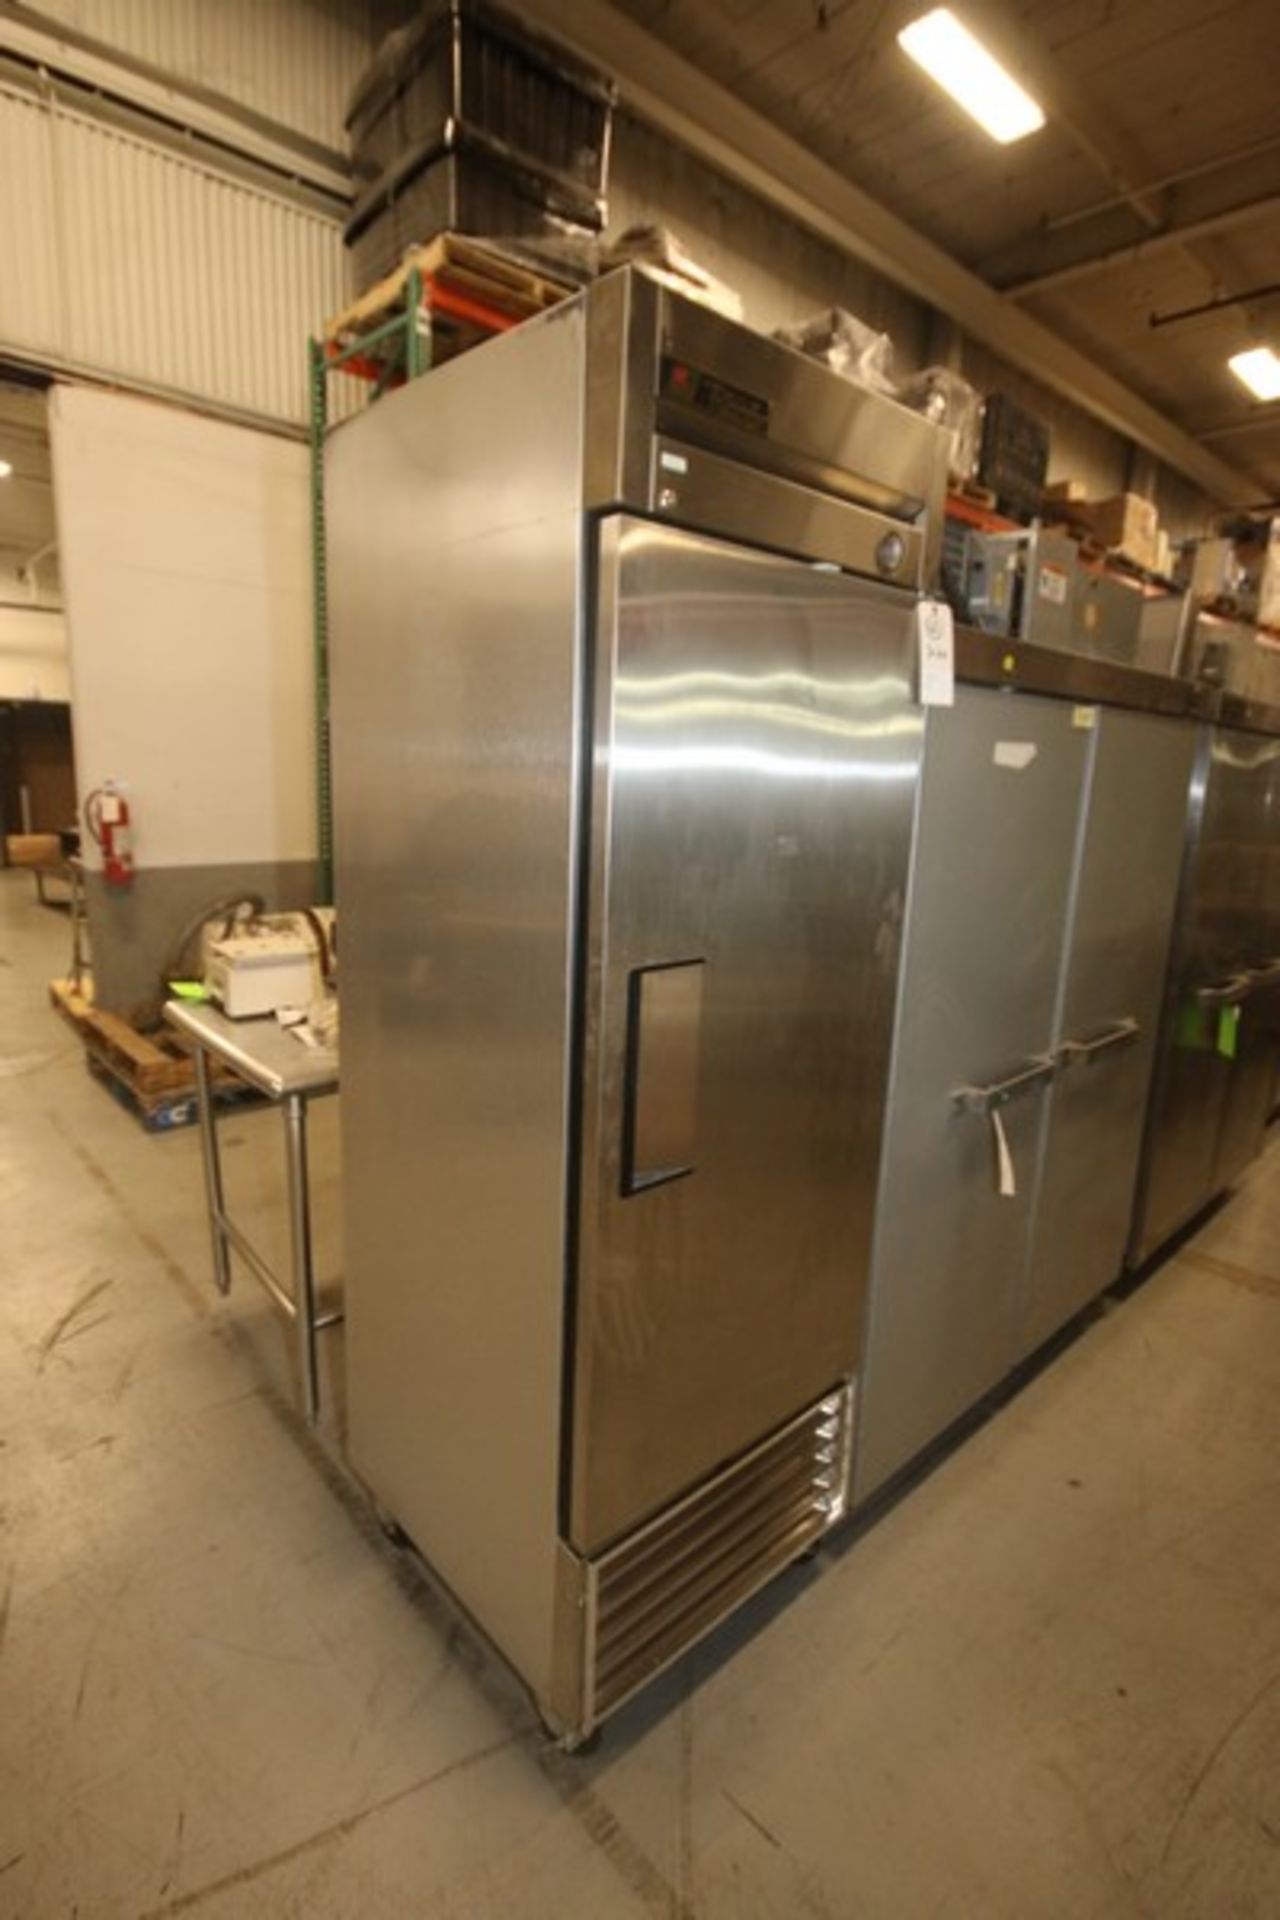 True S/S Upright Freezer,Overall Dims.: Aprox. 29-1/2" L x 27" W x 83" H, Mounted on Portable - Image 2 of 5